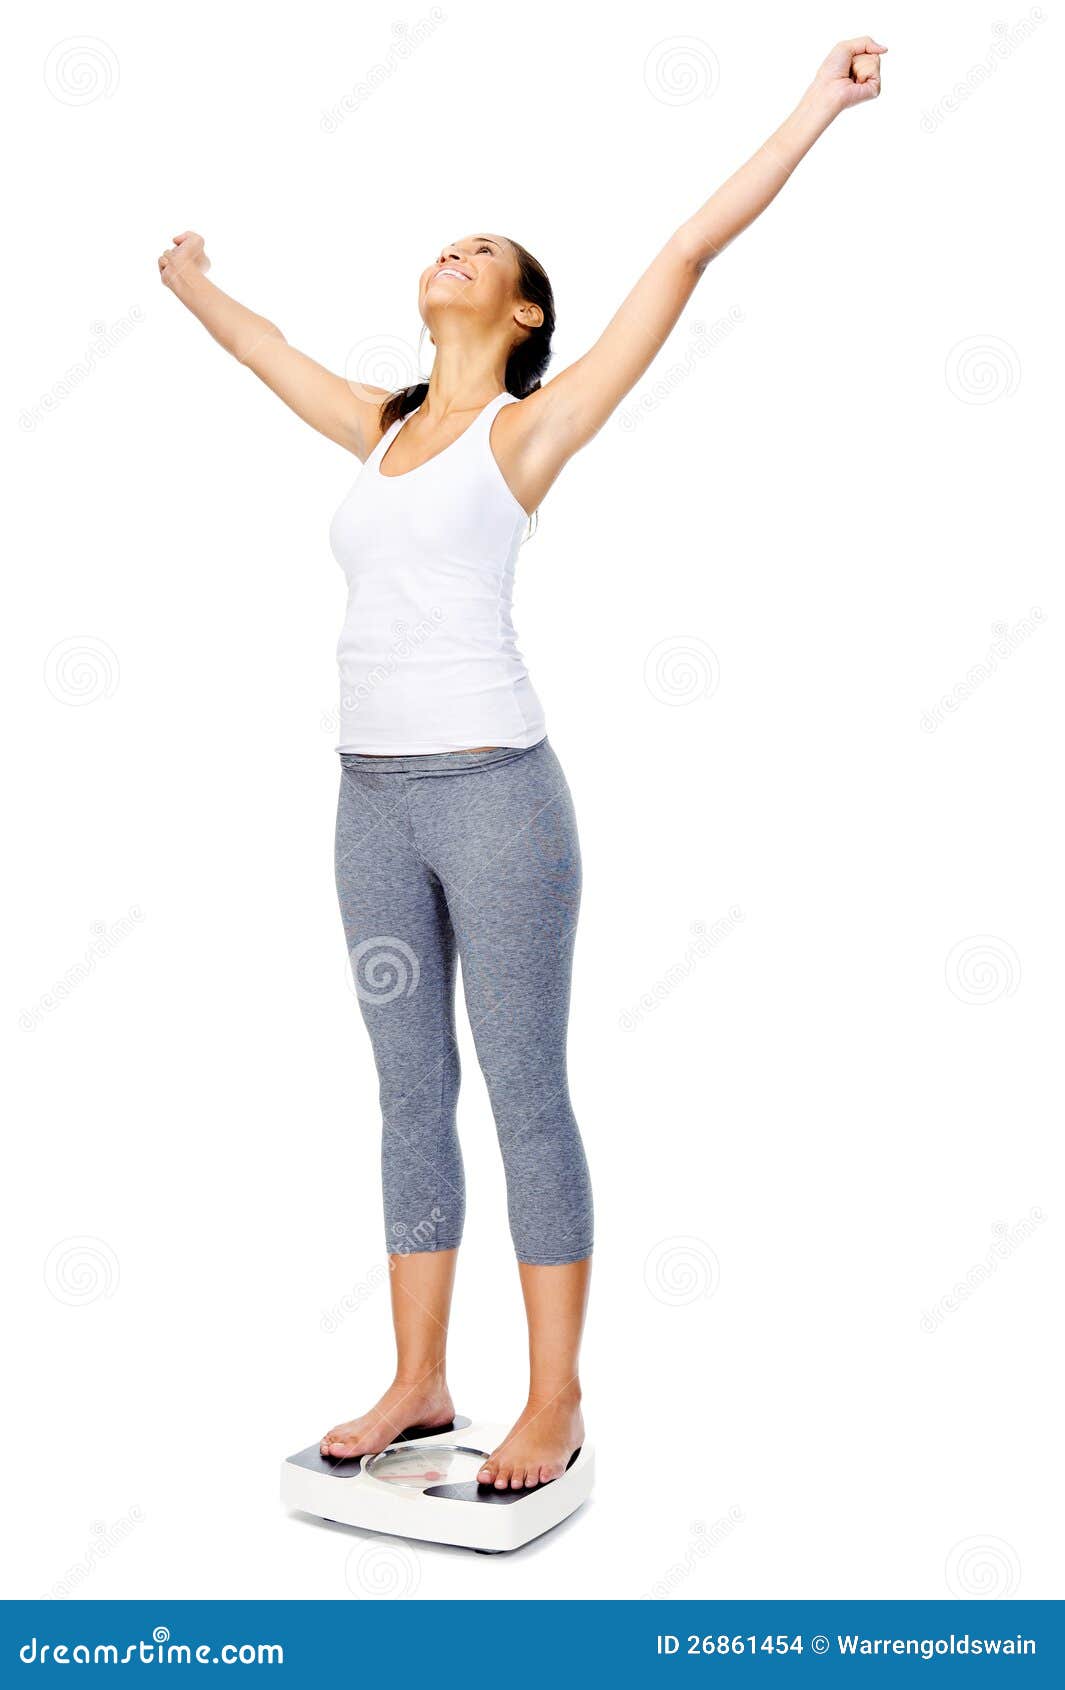 weightloss scale woman